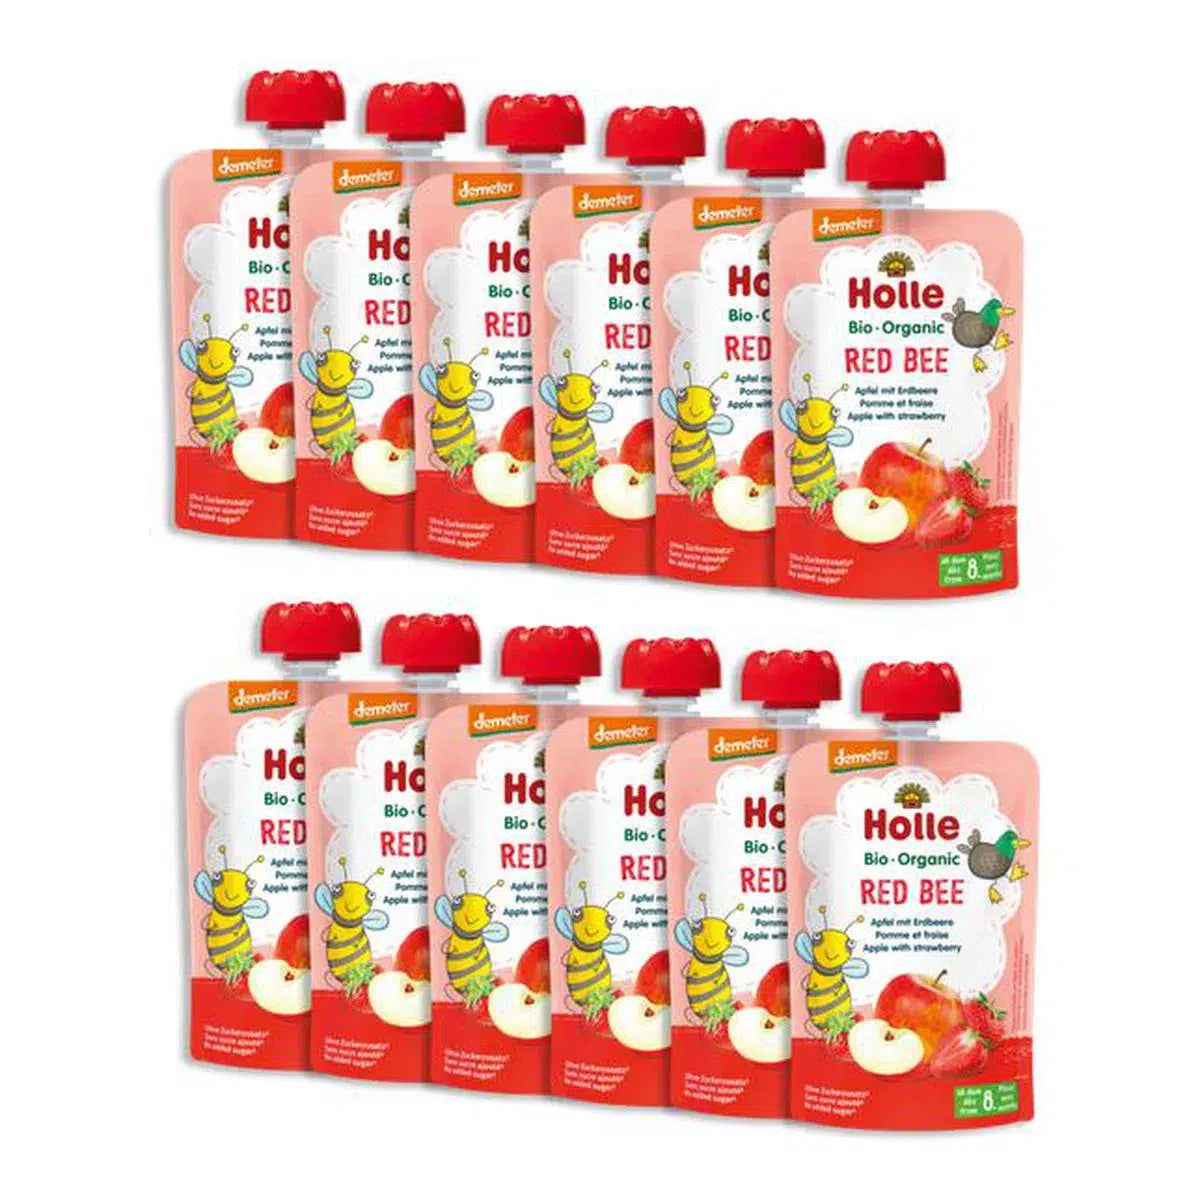 Holle Red Bee: Apple & Strawberry (8+ Months) - 12 Pouches